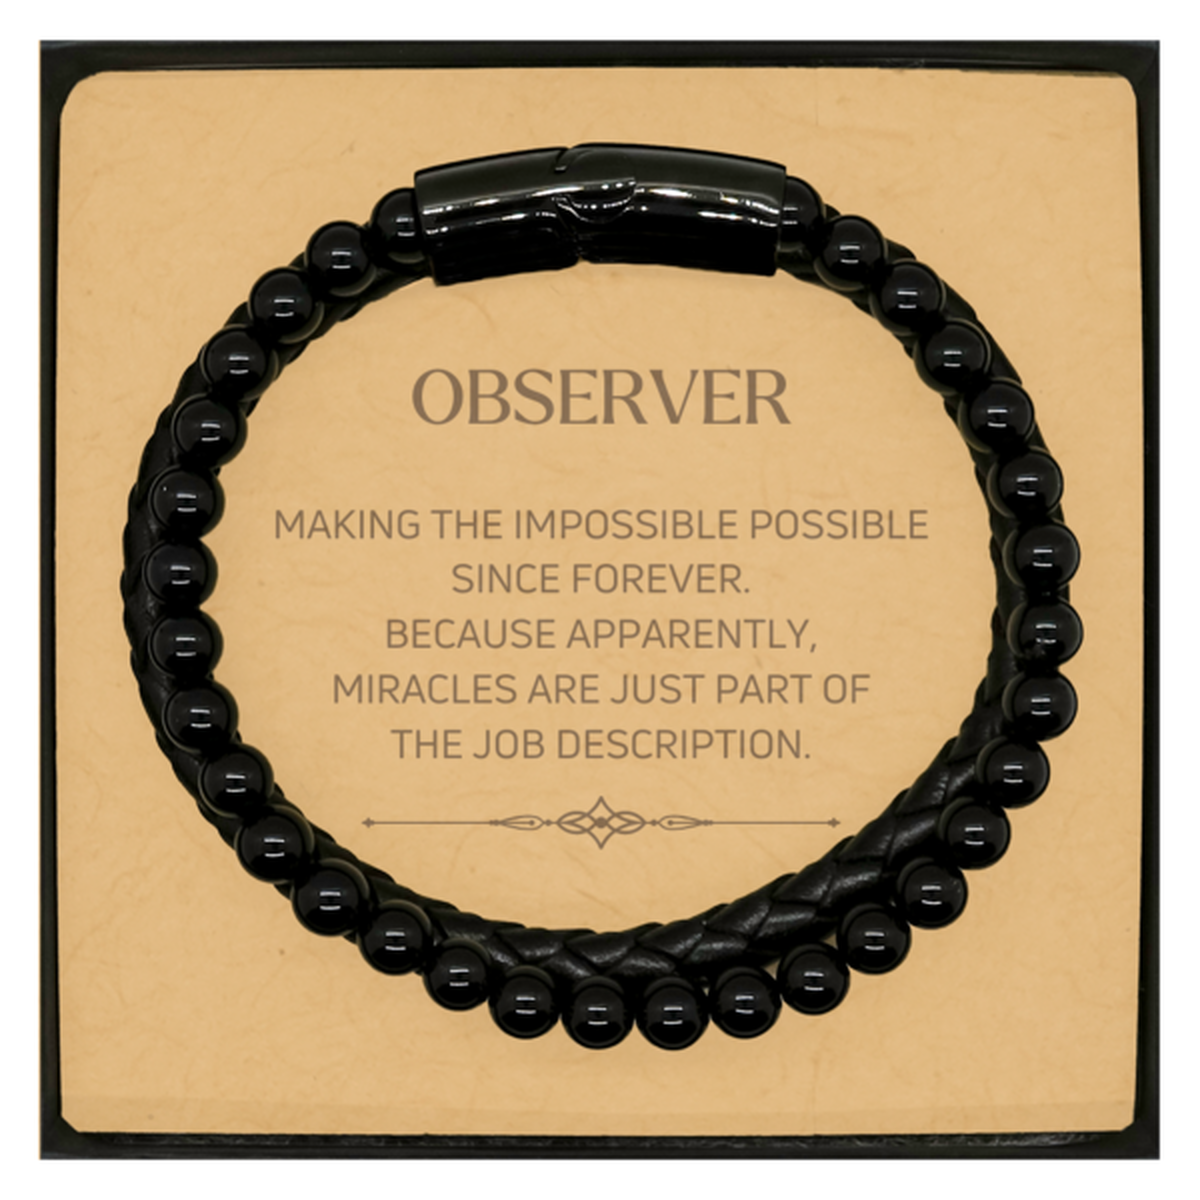 Funny Observer Gifts, Miracles are just part of the job description, Inspirational Birthday Christmas Stone Leather Bracelets For Observer, Men, Women, Coworkers, Friends, Boss